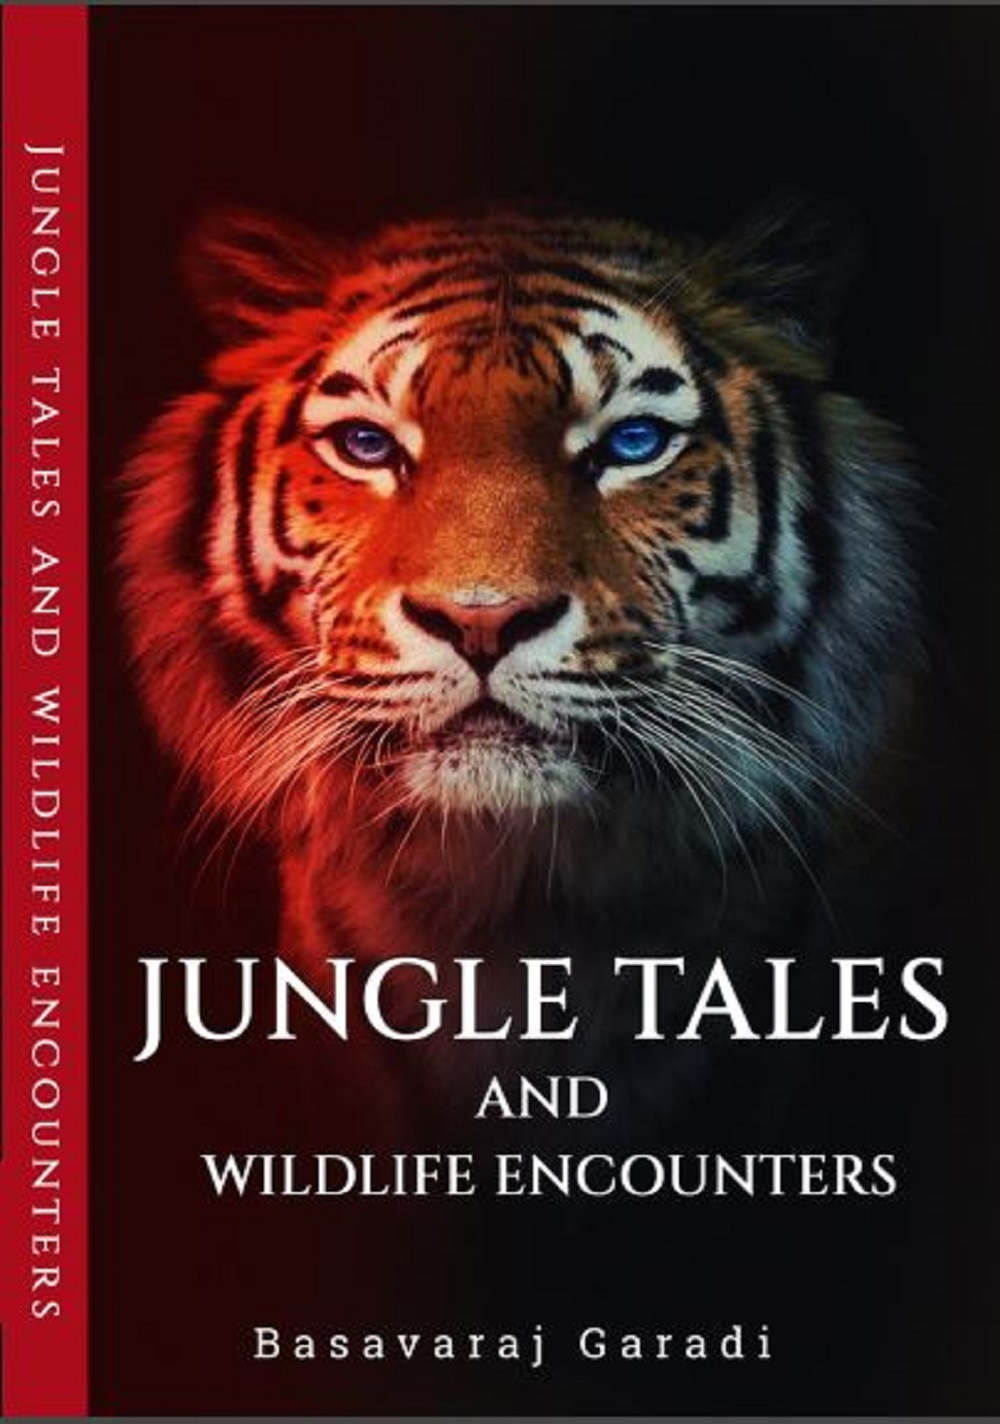 Jungle Tales and Wildlife Encounters